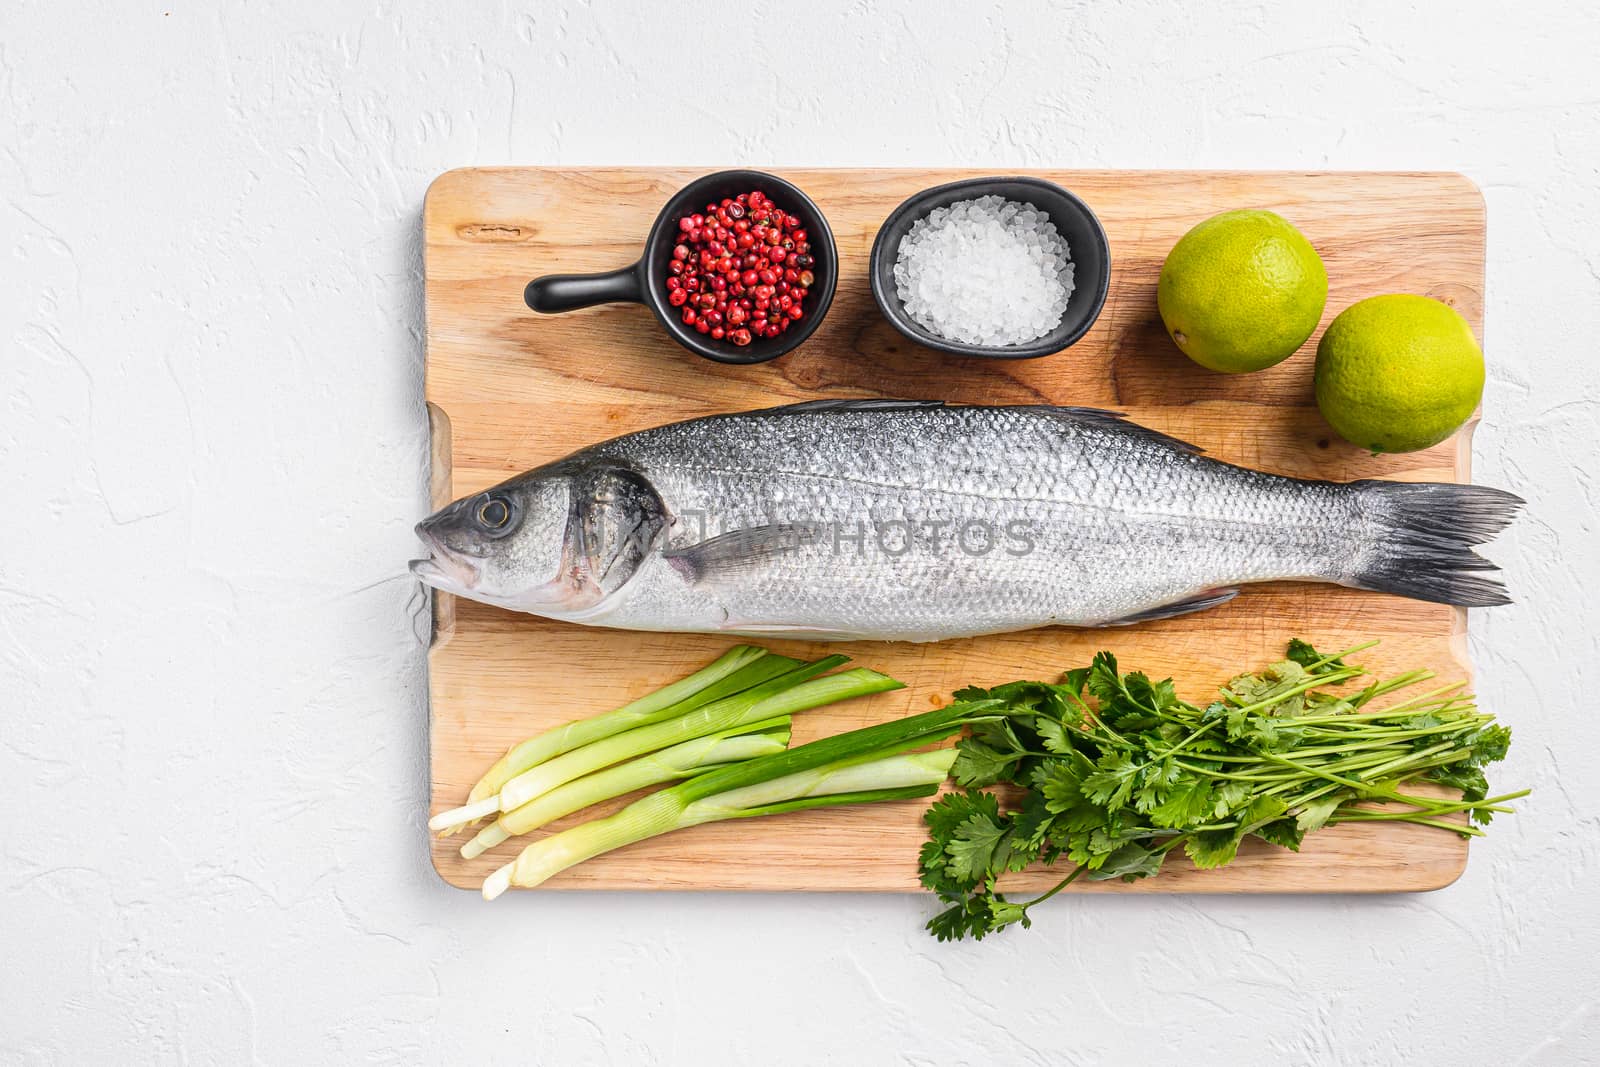 Whole sea bass with spices and herbs ingredients on chopping board over white textured background top view space for text